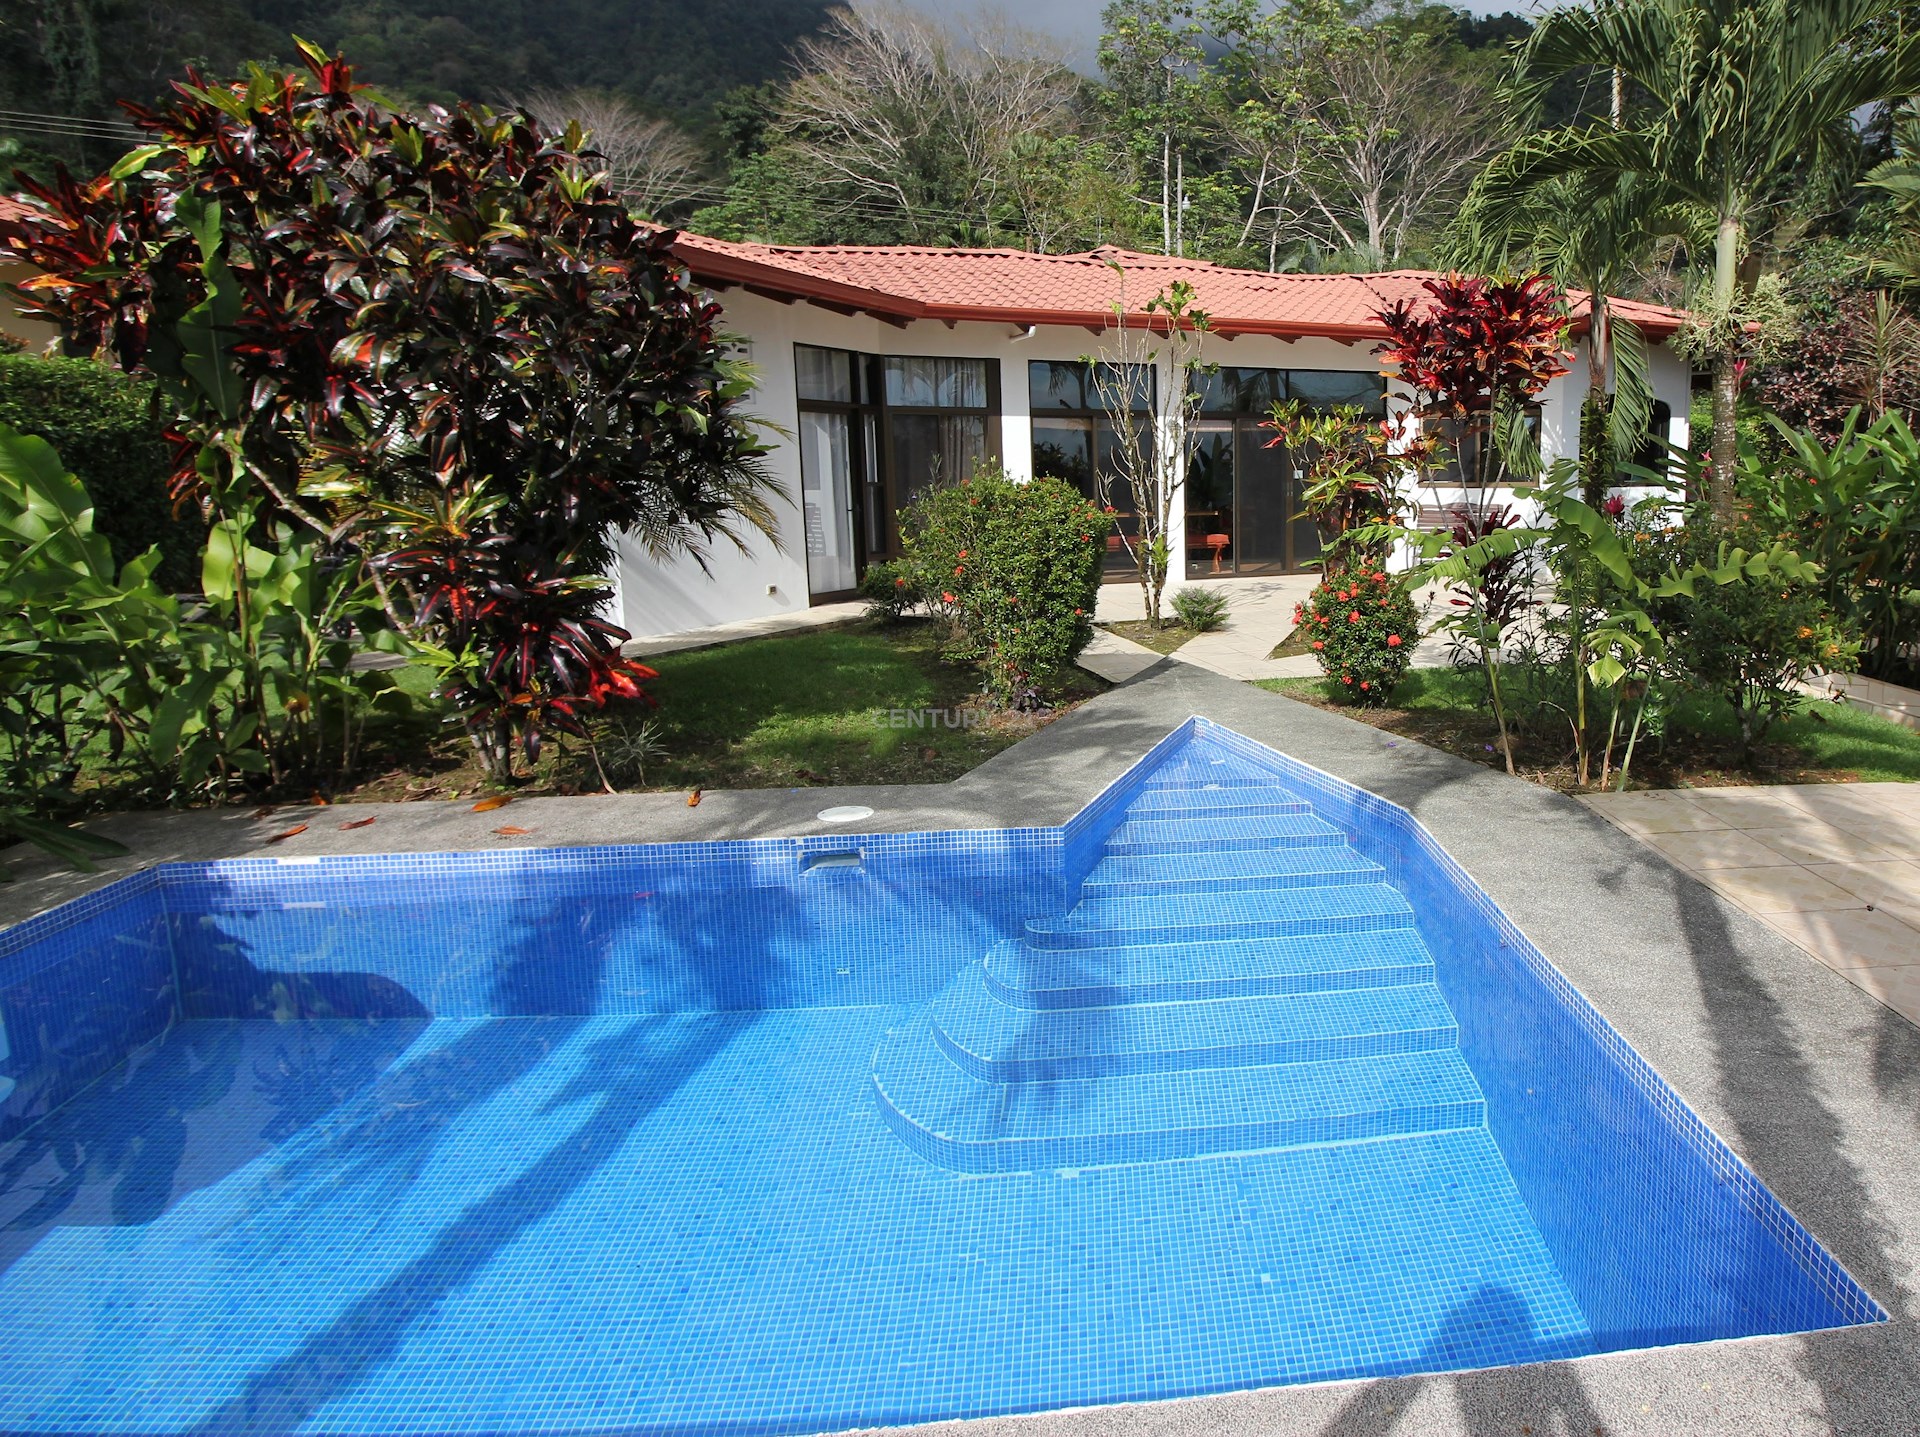 0.17 ACRES - 4 Bedroom Home With Pool And Small Ocean Window!!